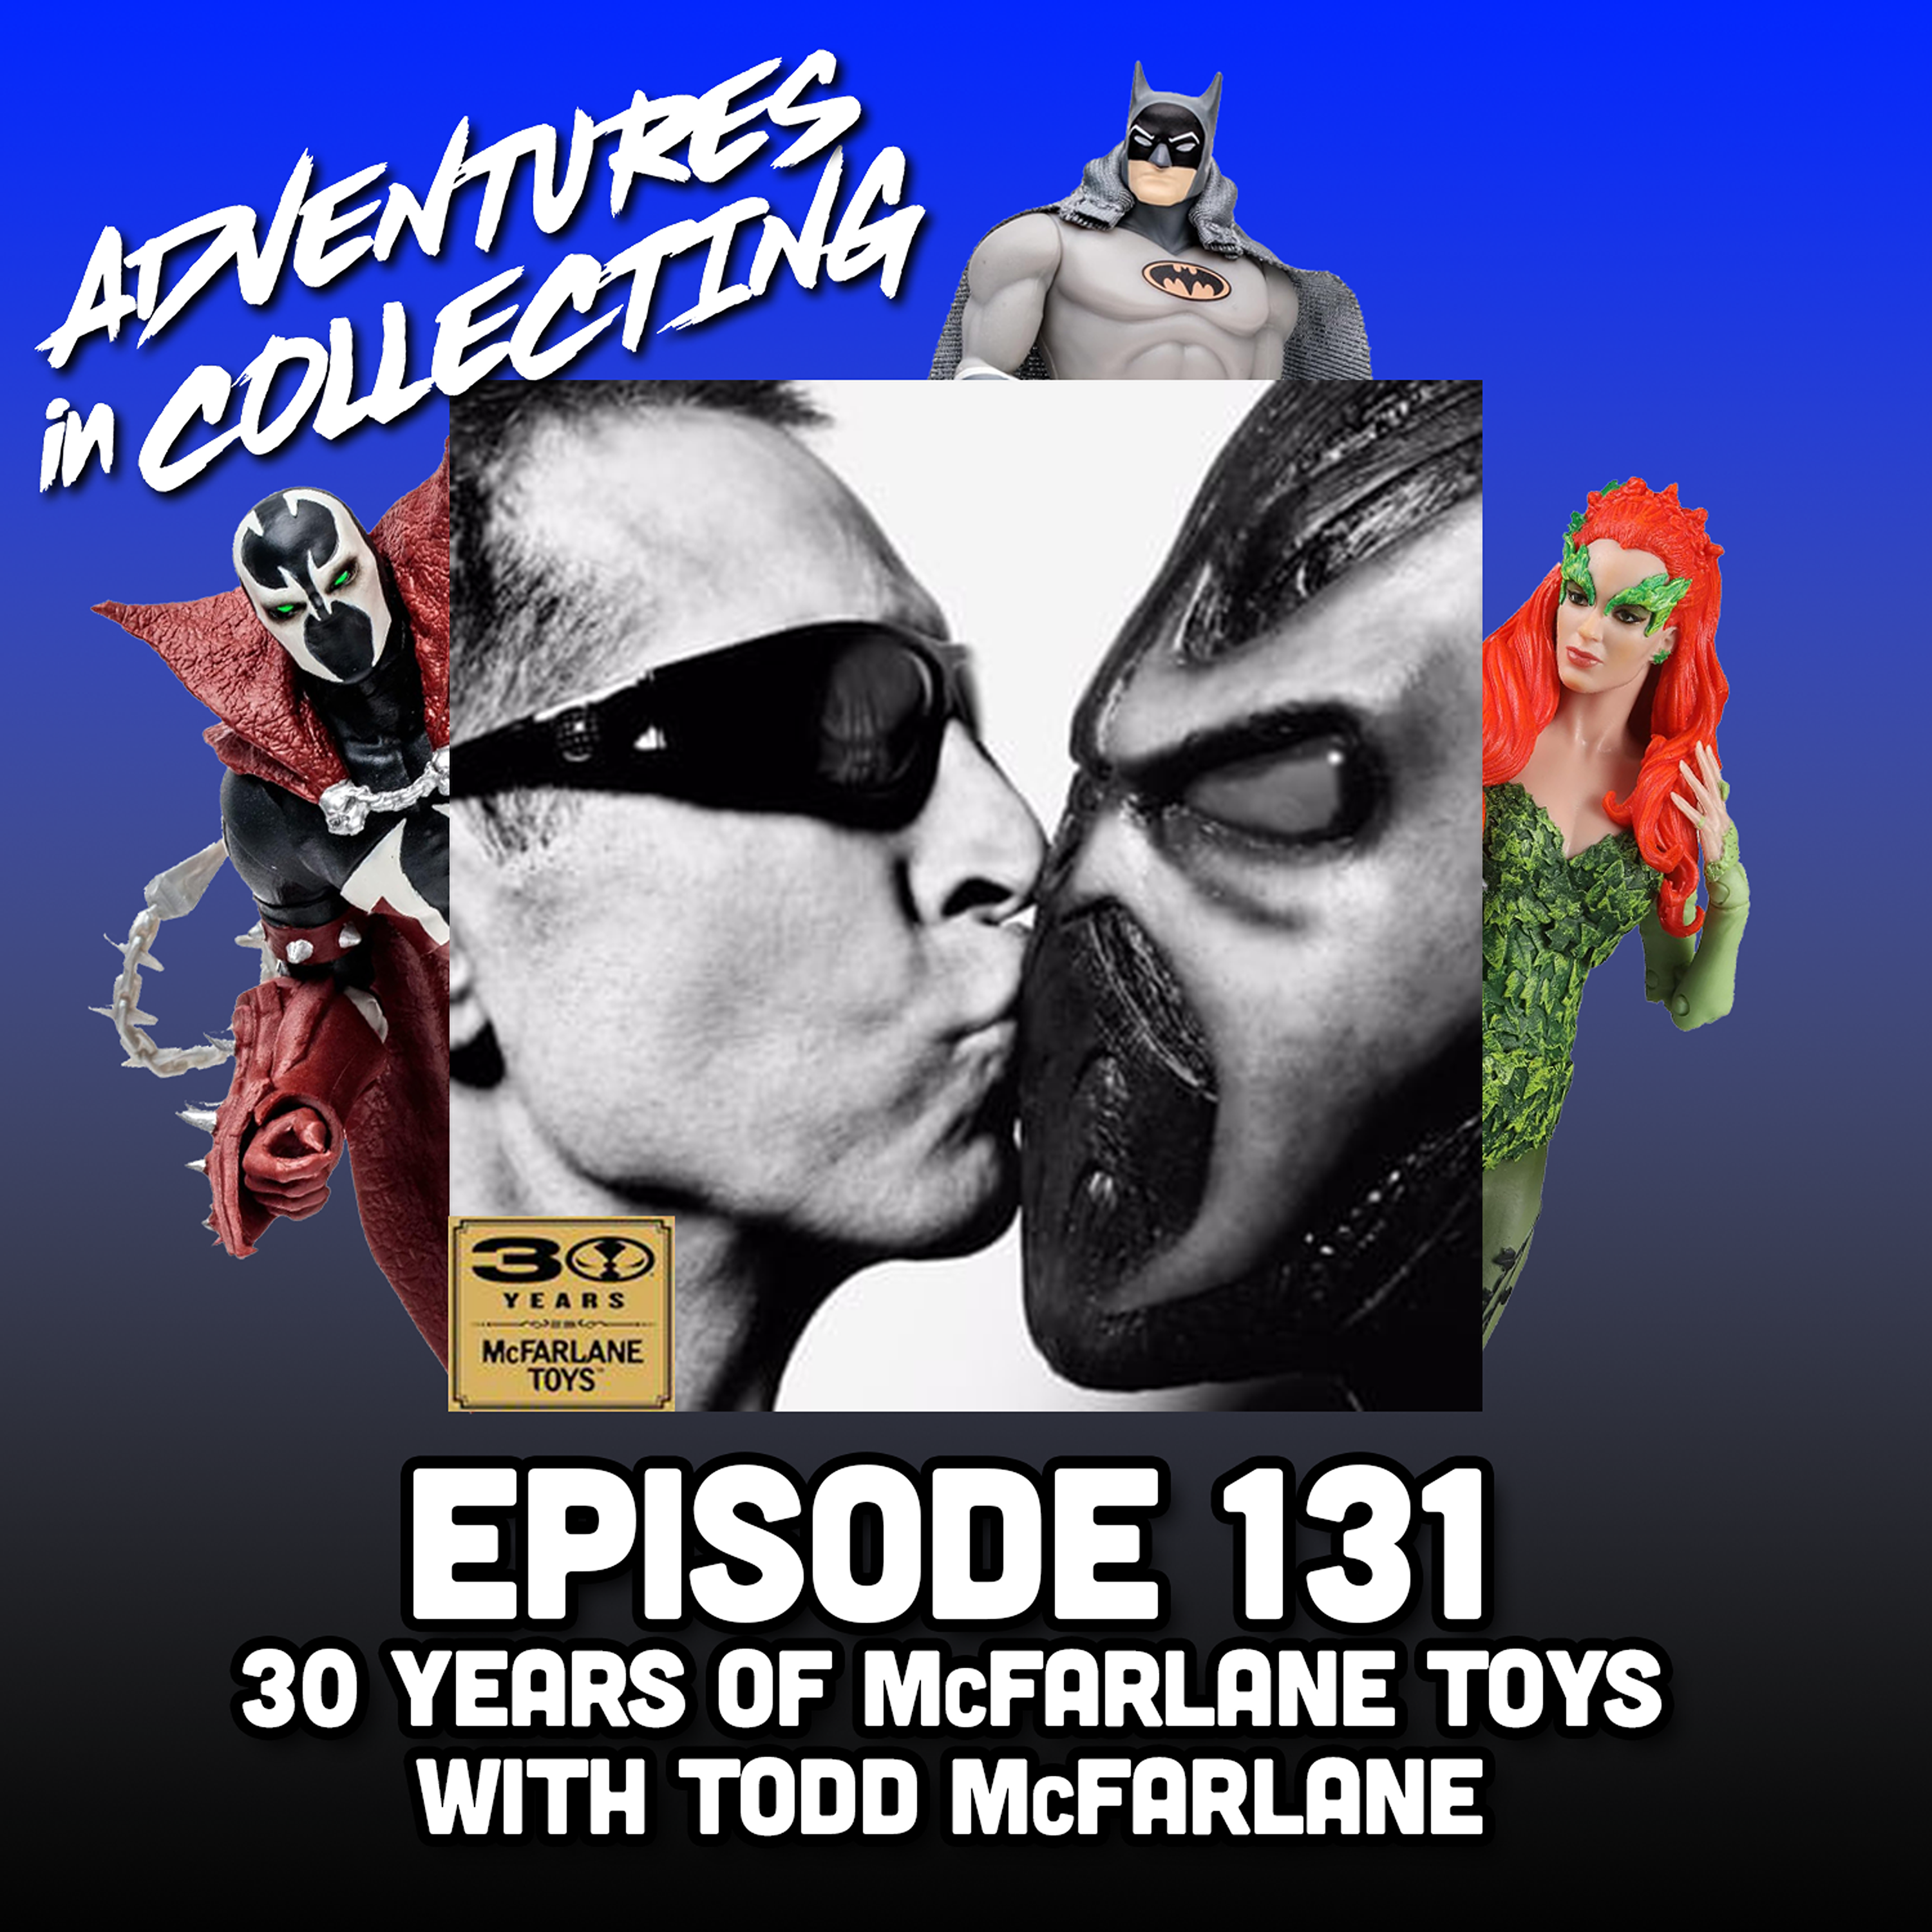 30 Years of McFarlane Toys with Todd McFarlane